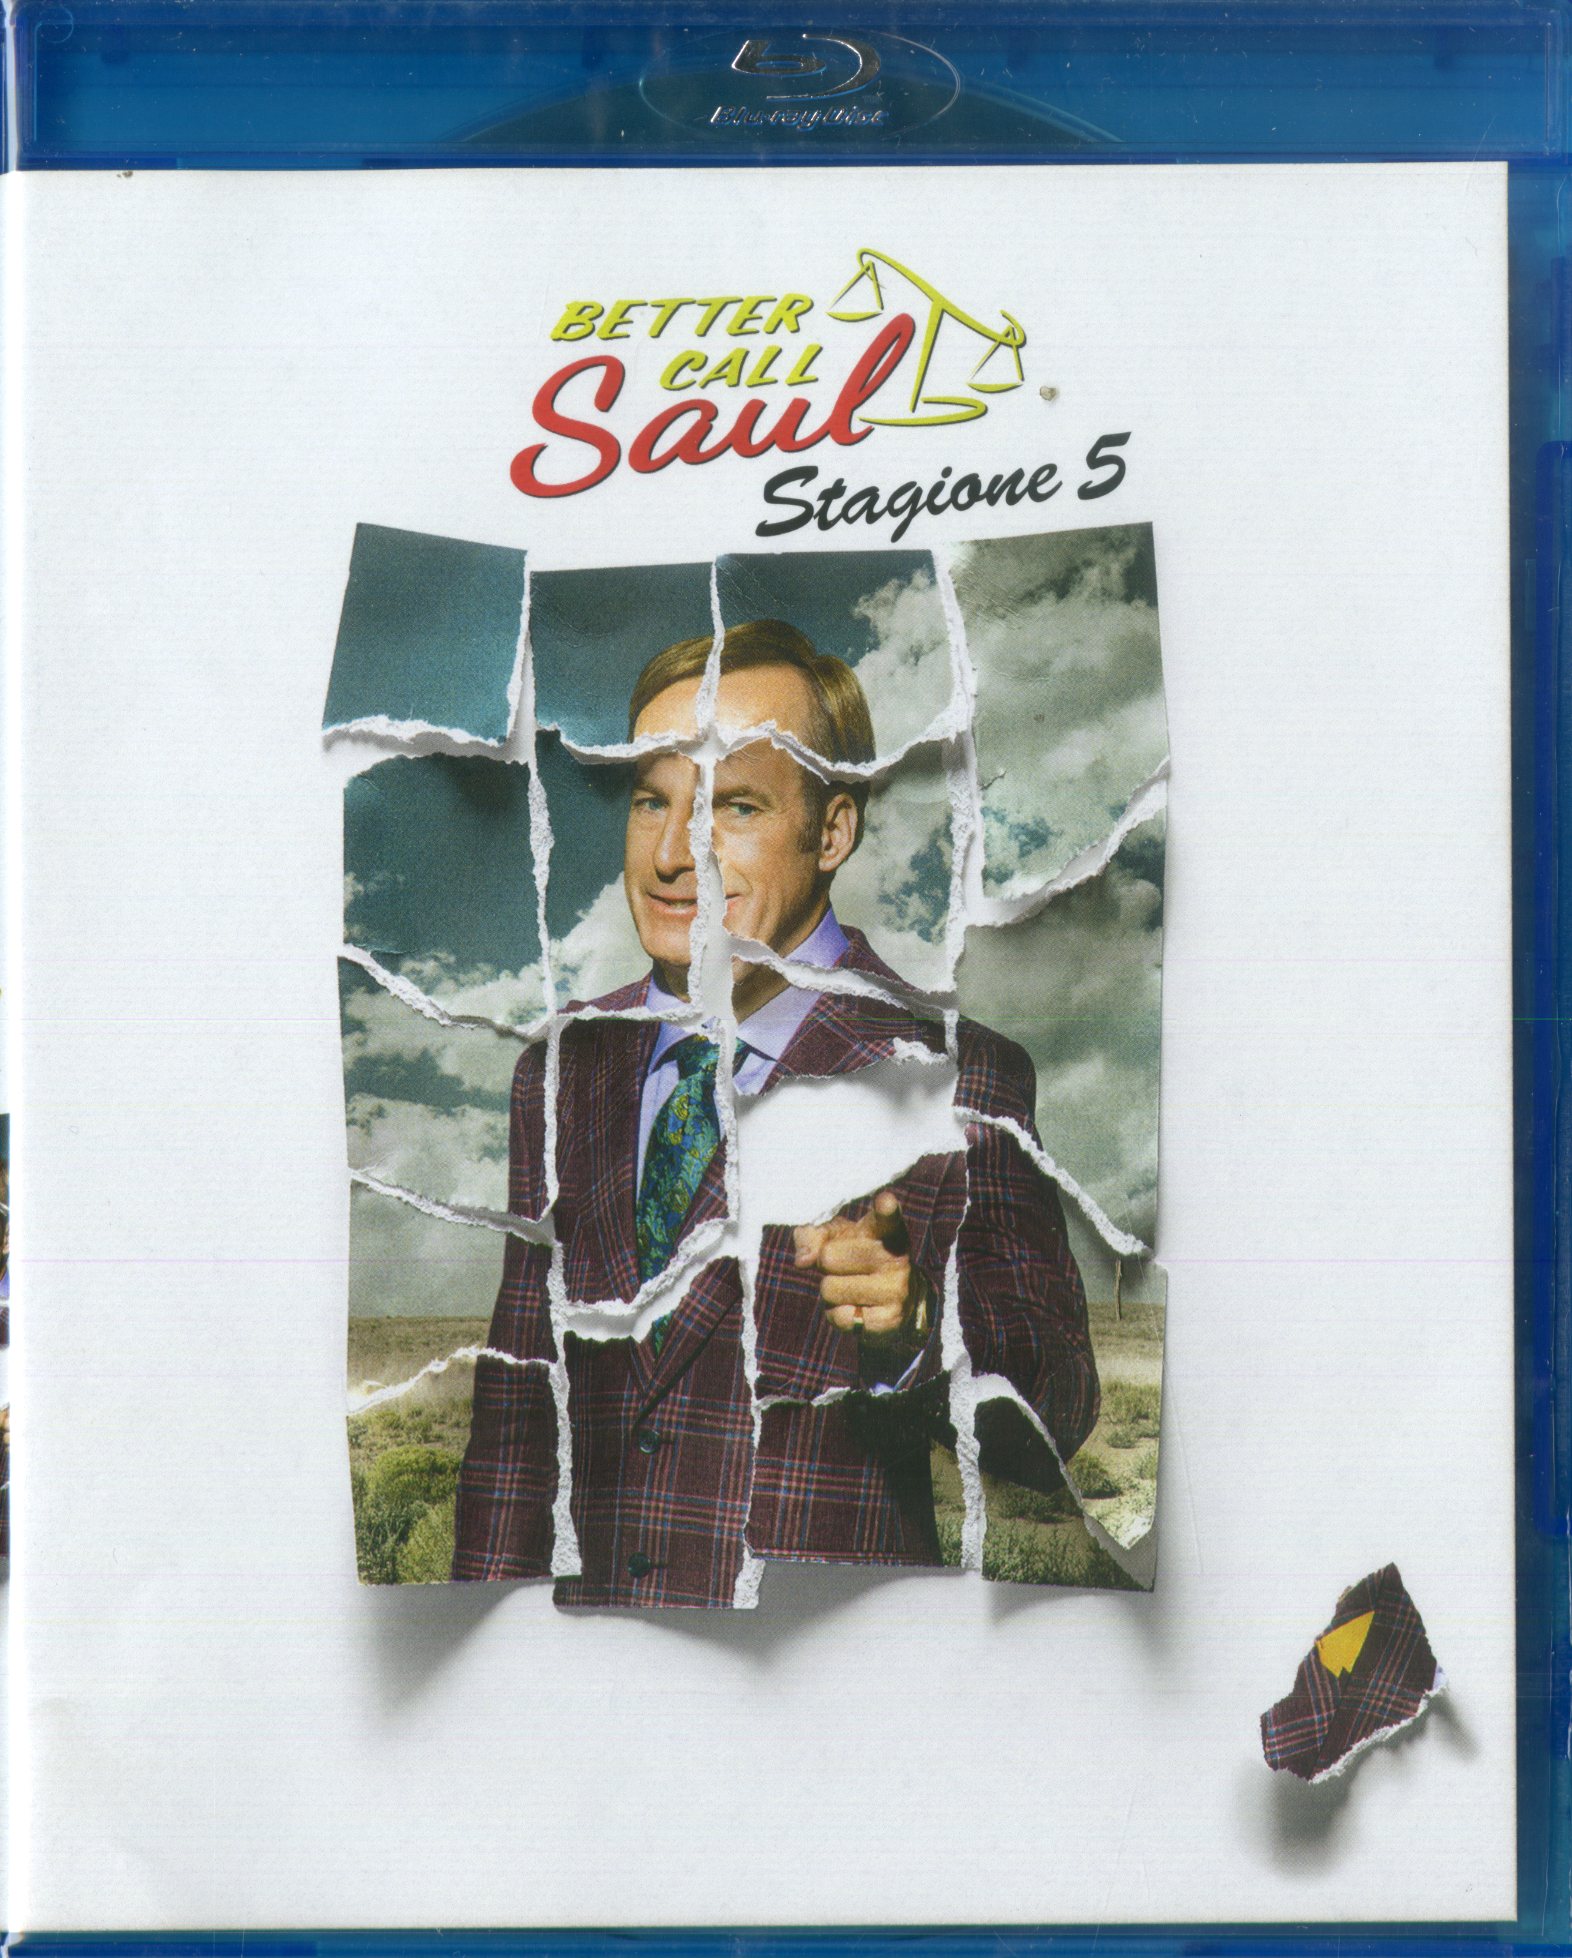 BETTER CALL SAUL - STAGIONE 05 (3 BLU-RAY)